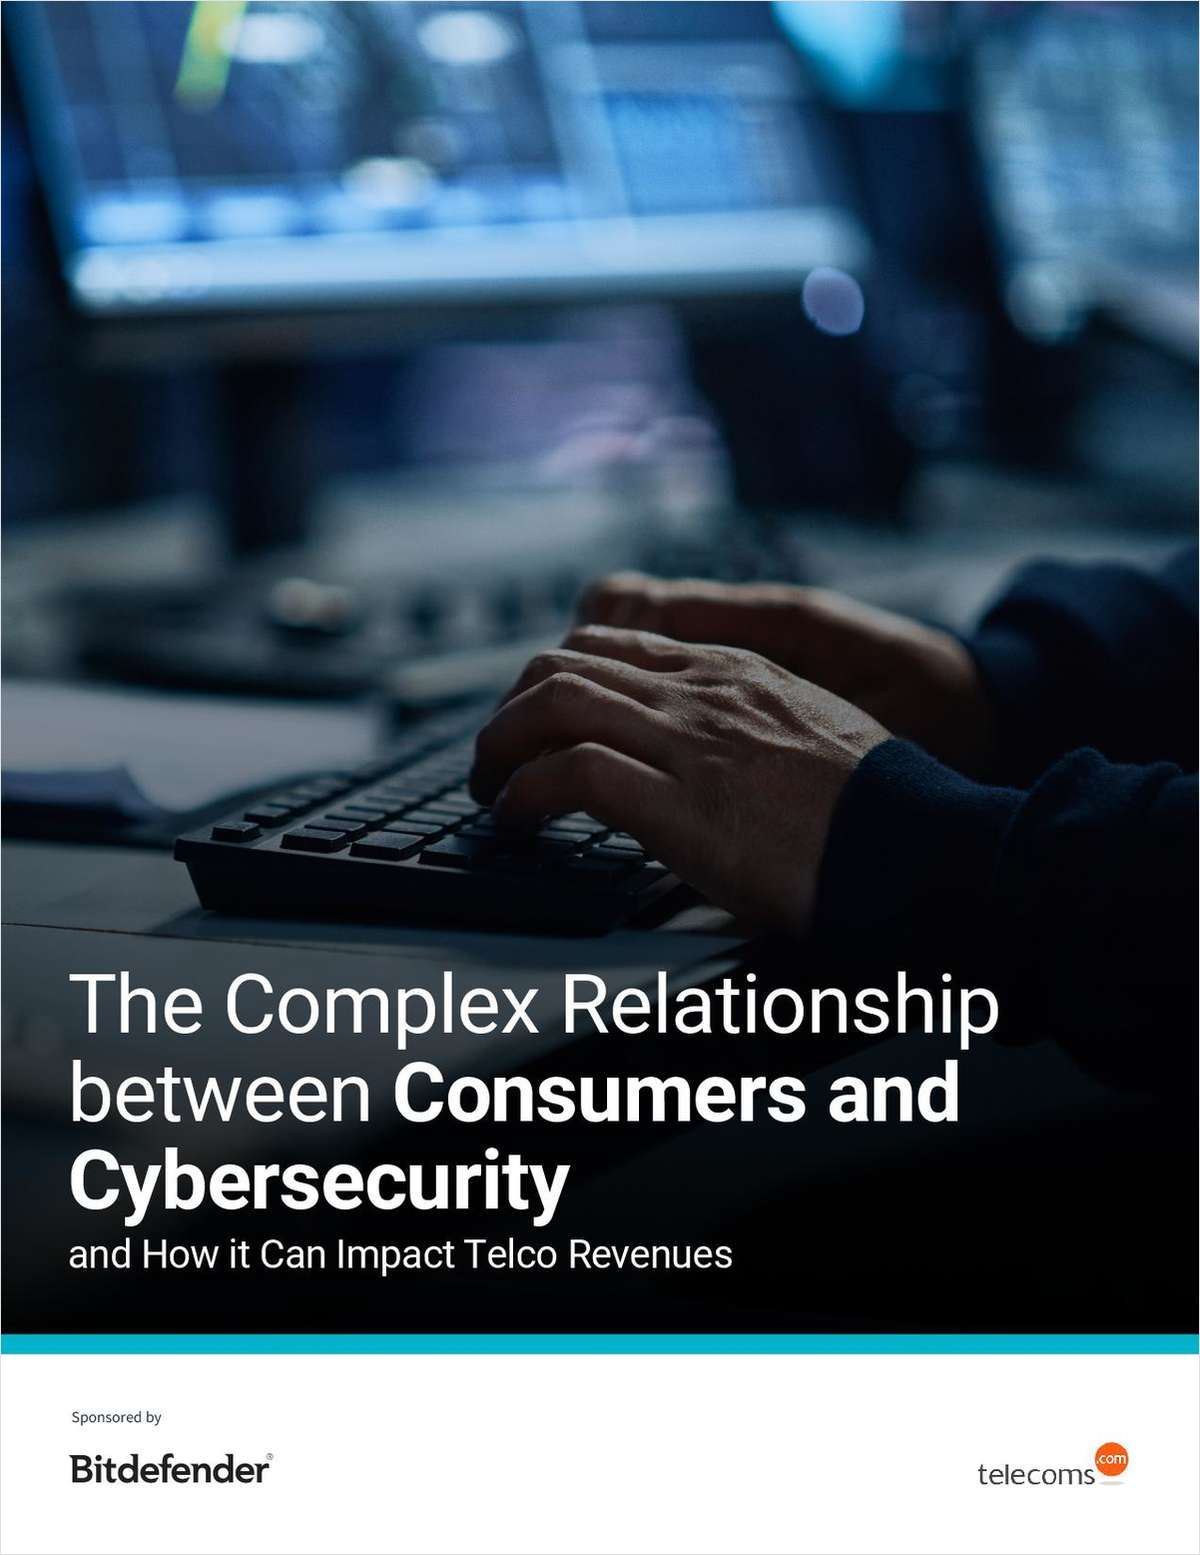 The Complex Relationship between Consumers and Cybersecurity and How it Can Impact Telco Revenues.